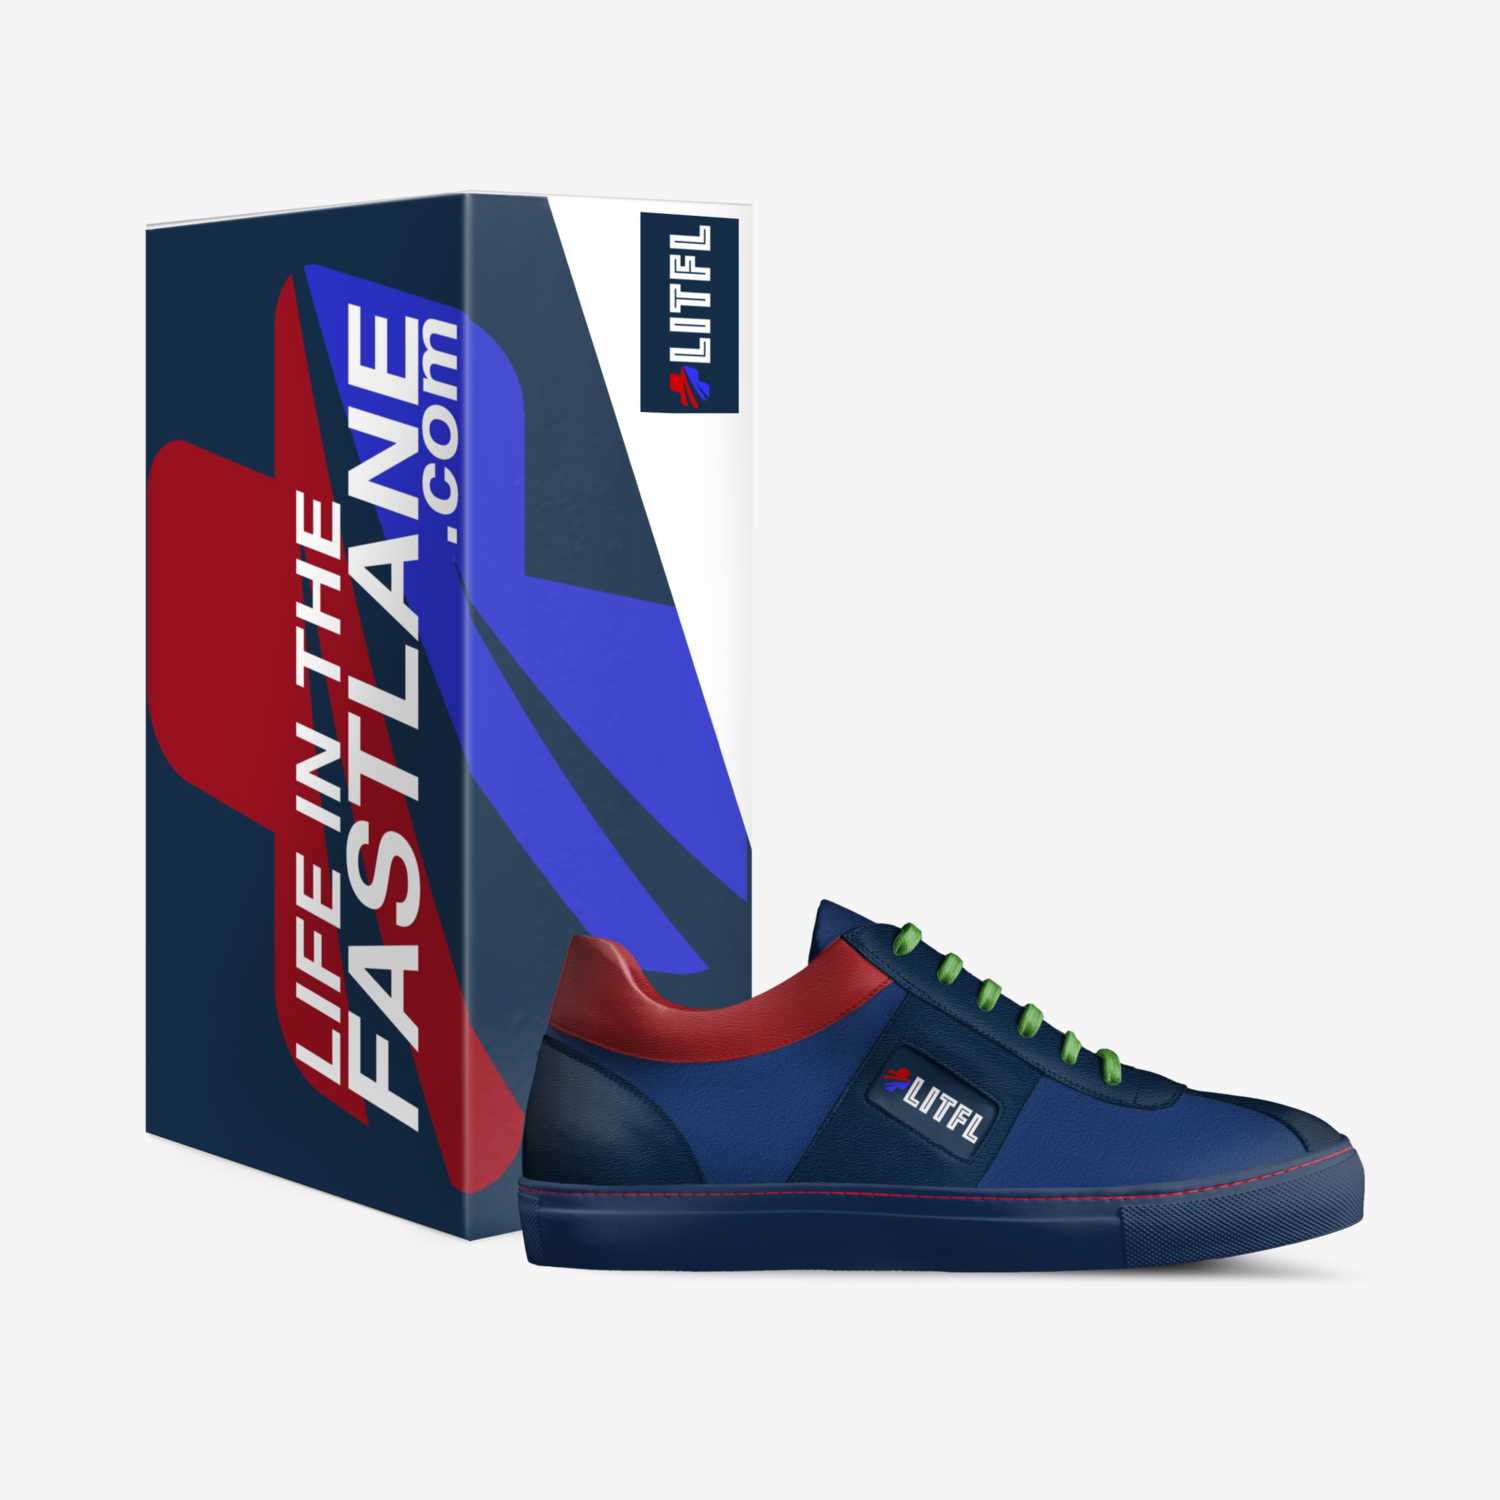 Life in the FastLane custom made in Italy shoes by Life In The Fastlane | Box view